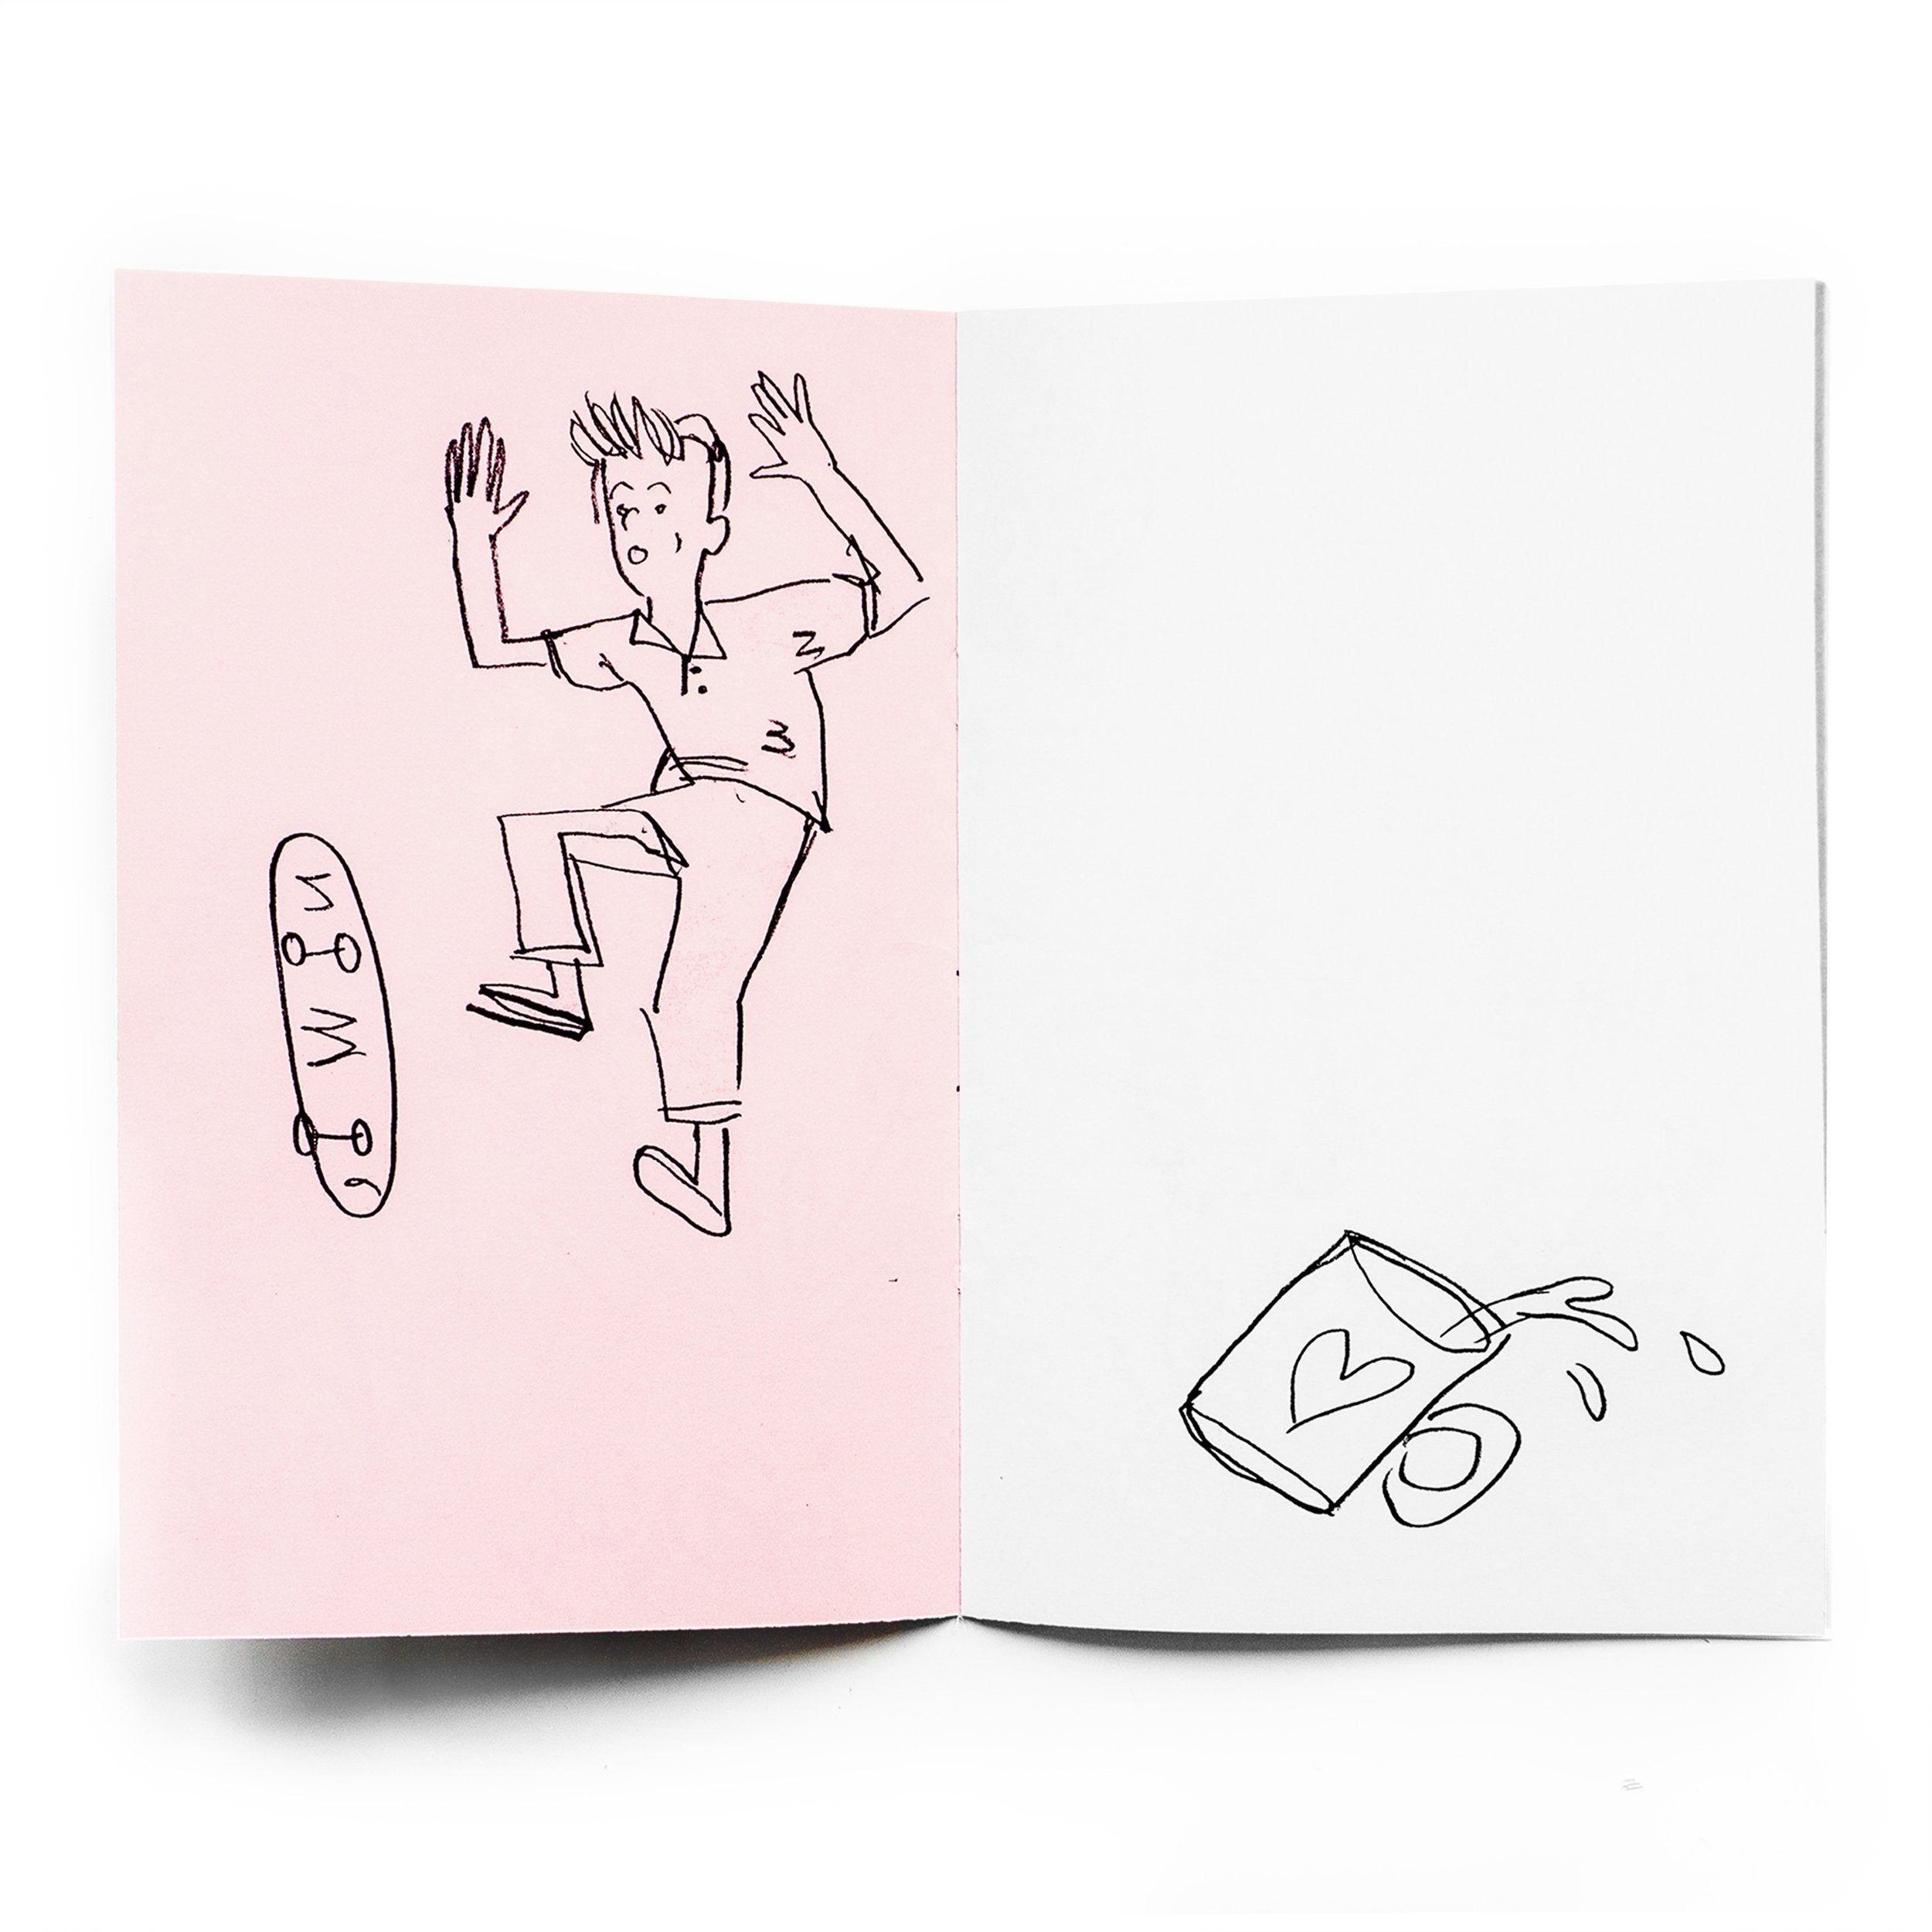 Inside spread of "Fresh Air". Left page is pink, with drawing of a skateboarder falling; right page is white with black drawing of a spilled coffee cup.